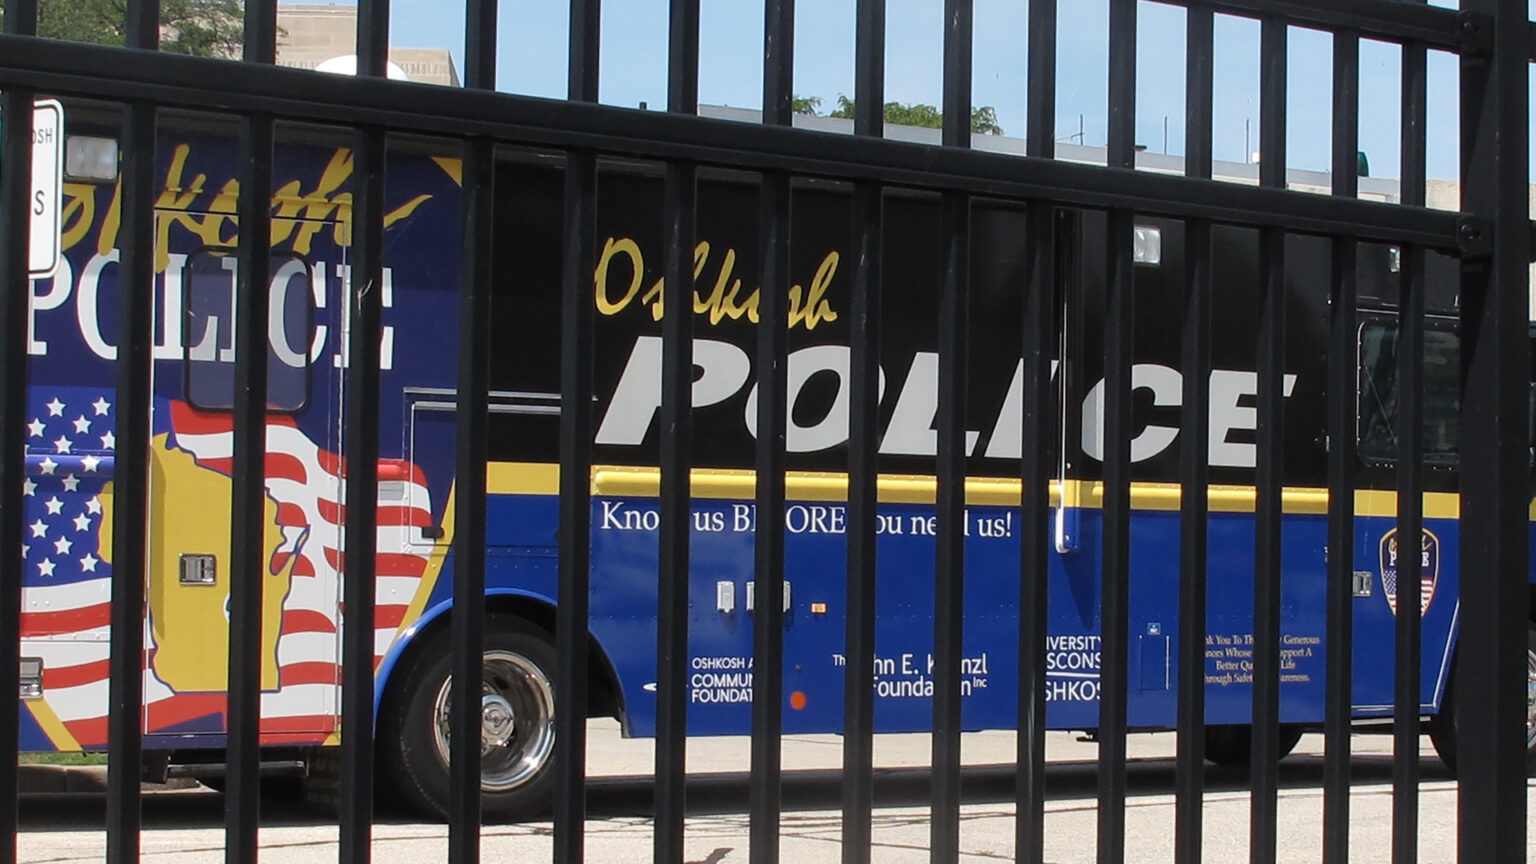 A bus with wrap graphics bearing multiple Oshkosh Police wordmarks, a graphic showing an outline of the state of Wisconsin atop the U.S. flag and other graphics is seen parked behind a painted metal fence with vertical bars.